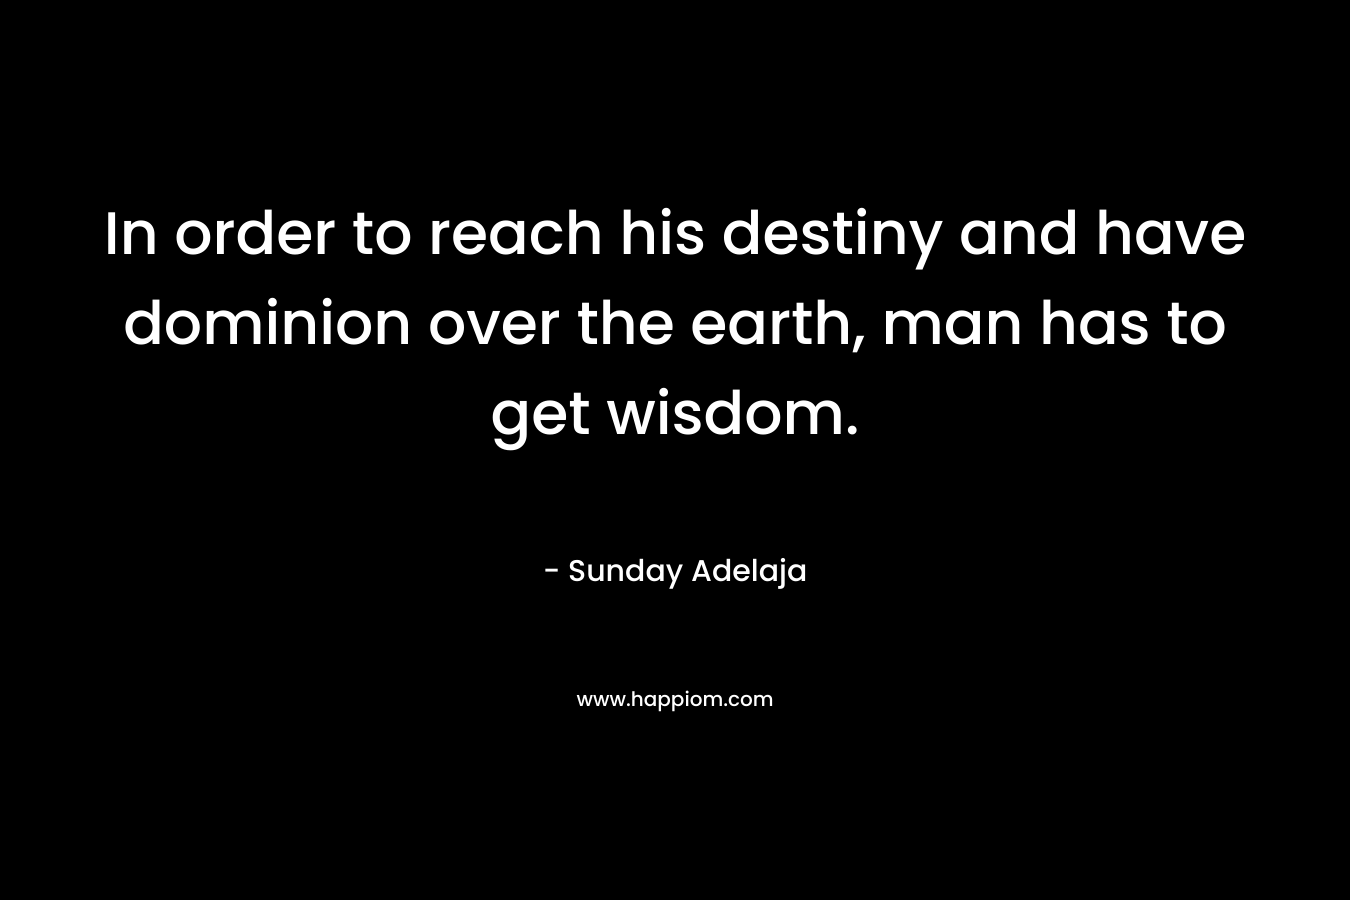 In order to reach his destiny and have dominion over the earth, man has to get wisdom. – Sunday Adelaja